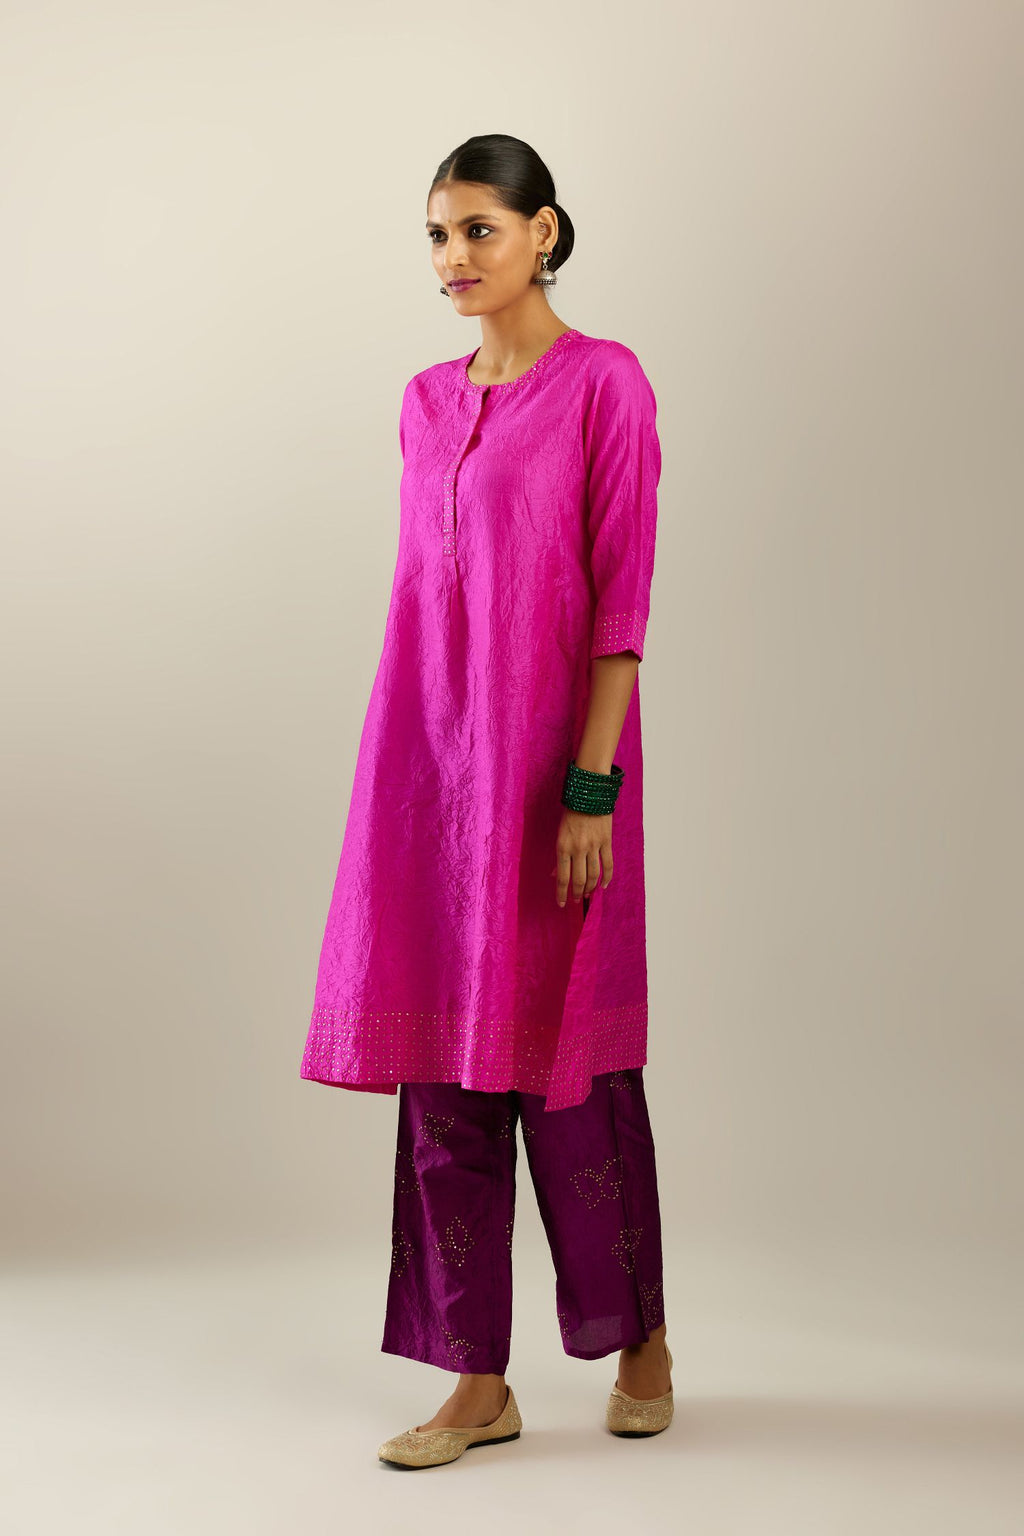 Fiji fuchsia silk hand crushed short kurta set with concealed button placket neckline, highlighted with gold sequins.